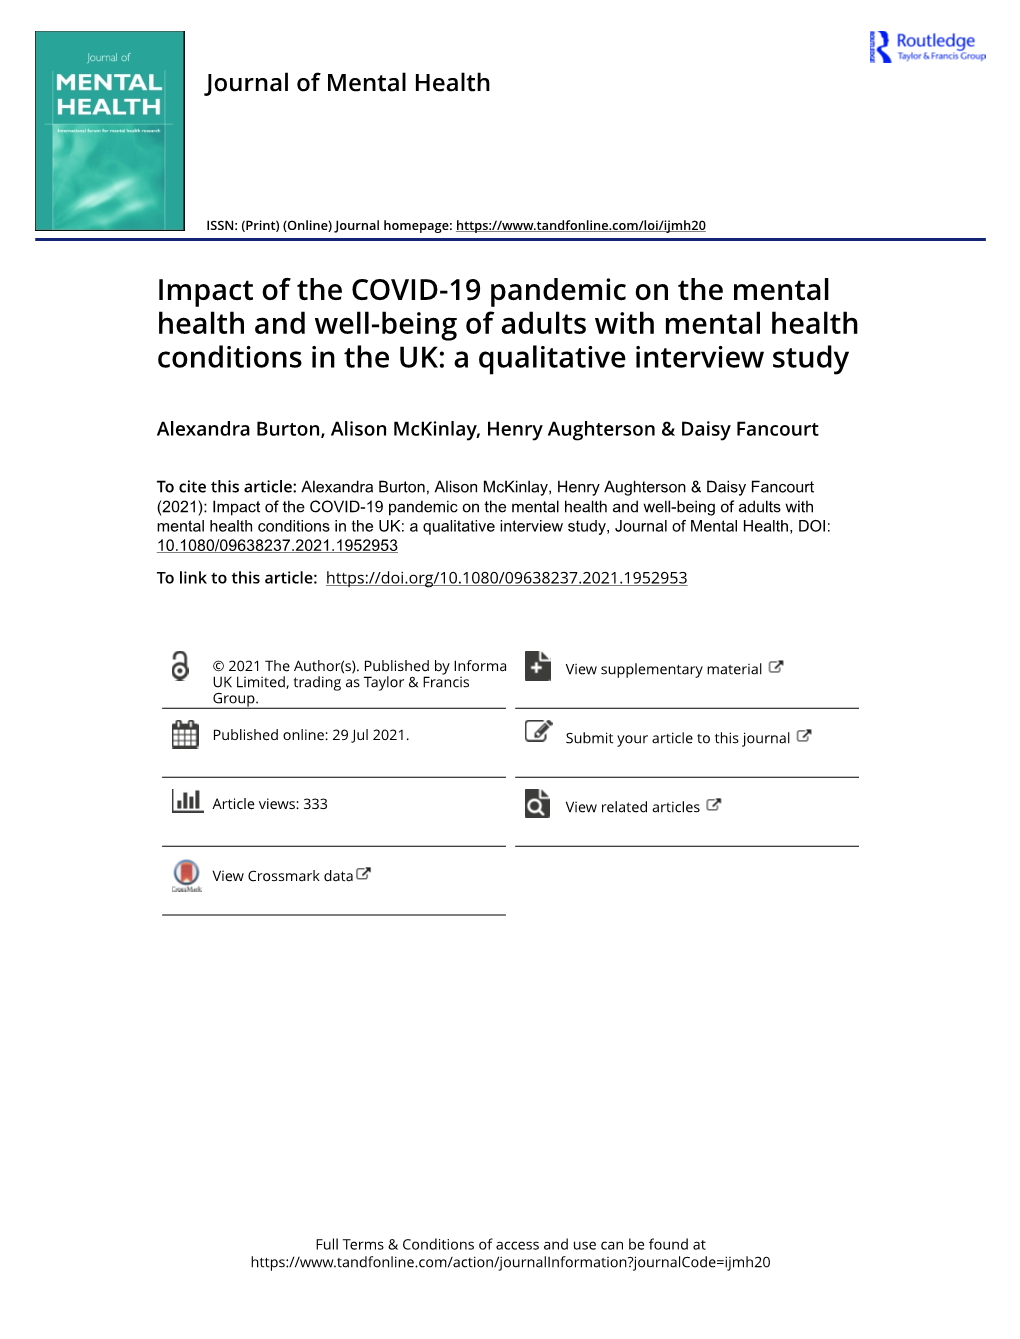 Impact of the COVID-19 Pandemic on the Mental Health and Well-Being of Adults with Mental Health Conditions in the UK: a Qualitative Interview Study